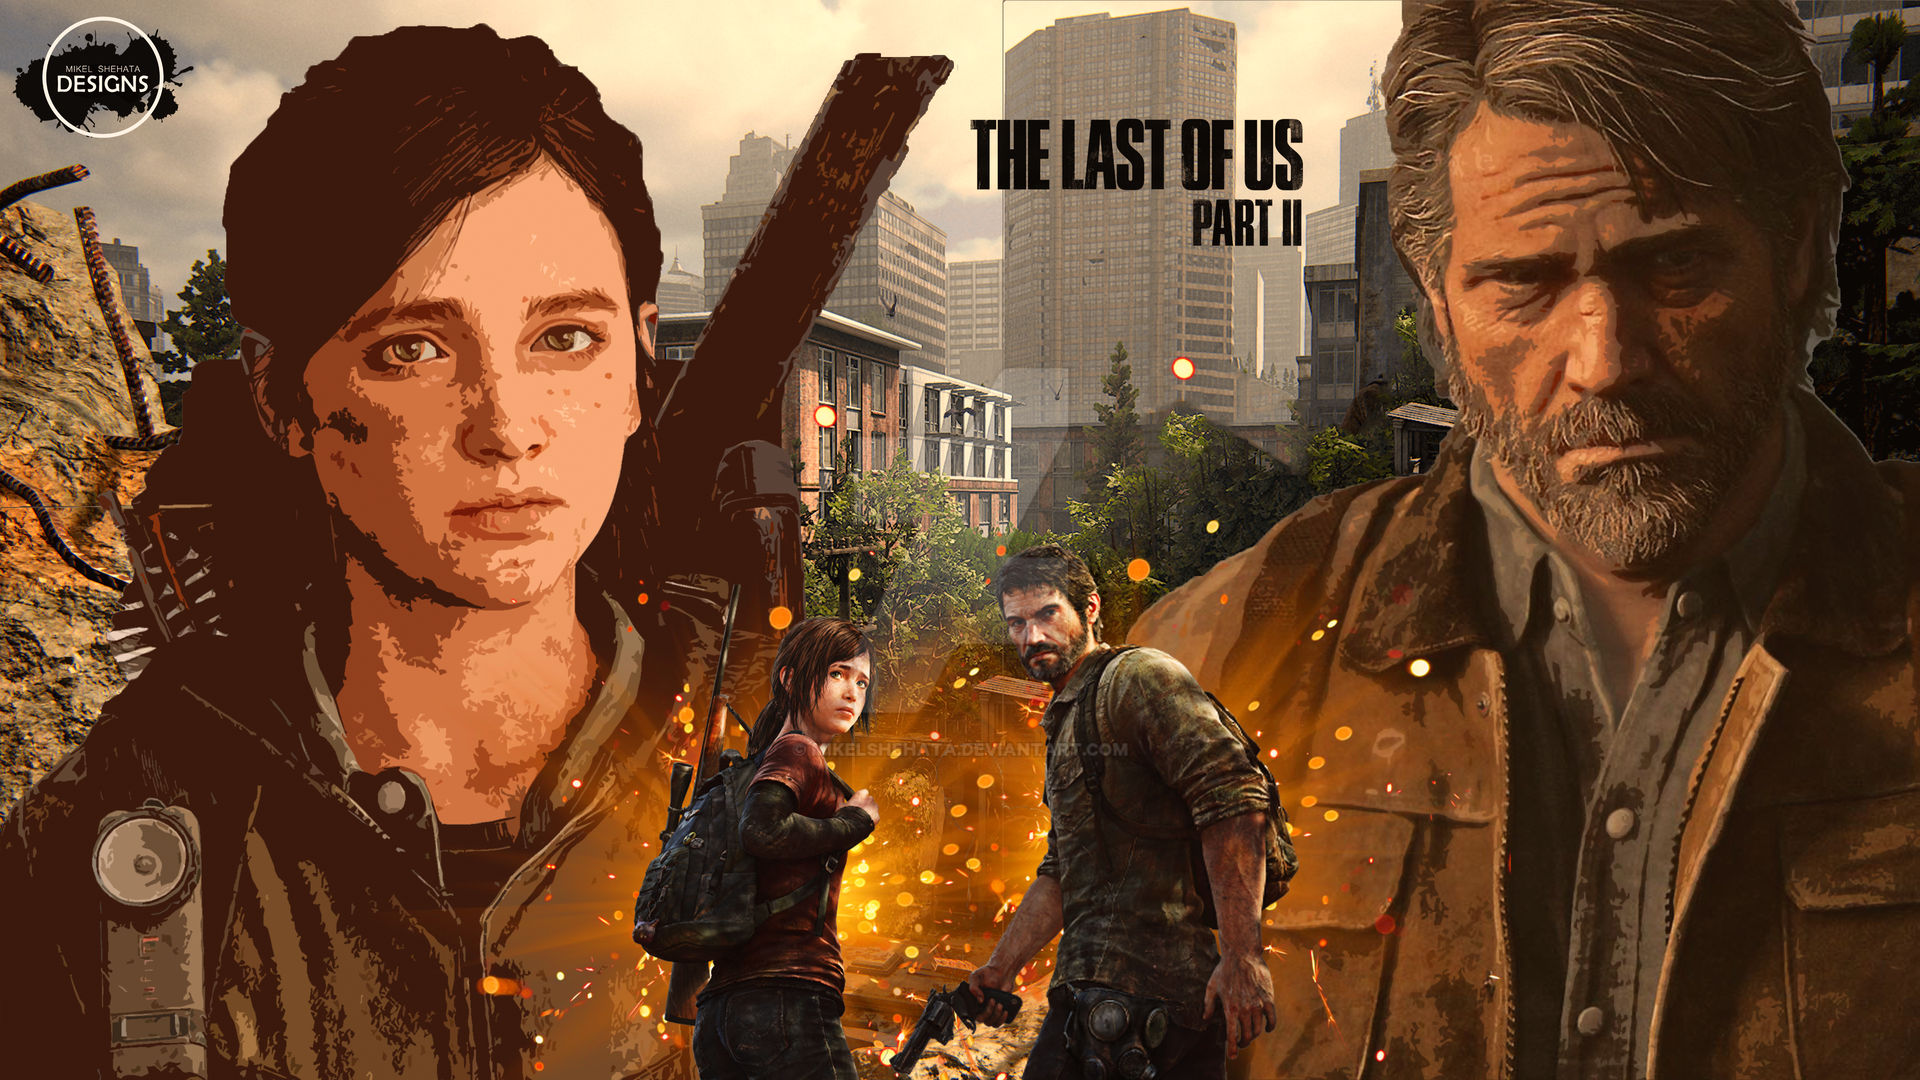 The Last of us 2 - Joel and Ellie Wallpaper by mikelshehata on DeviantArt